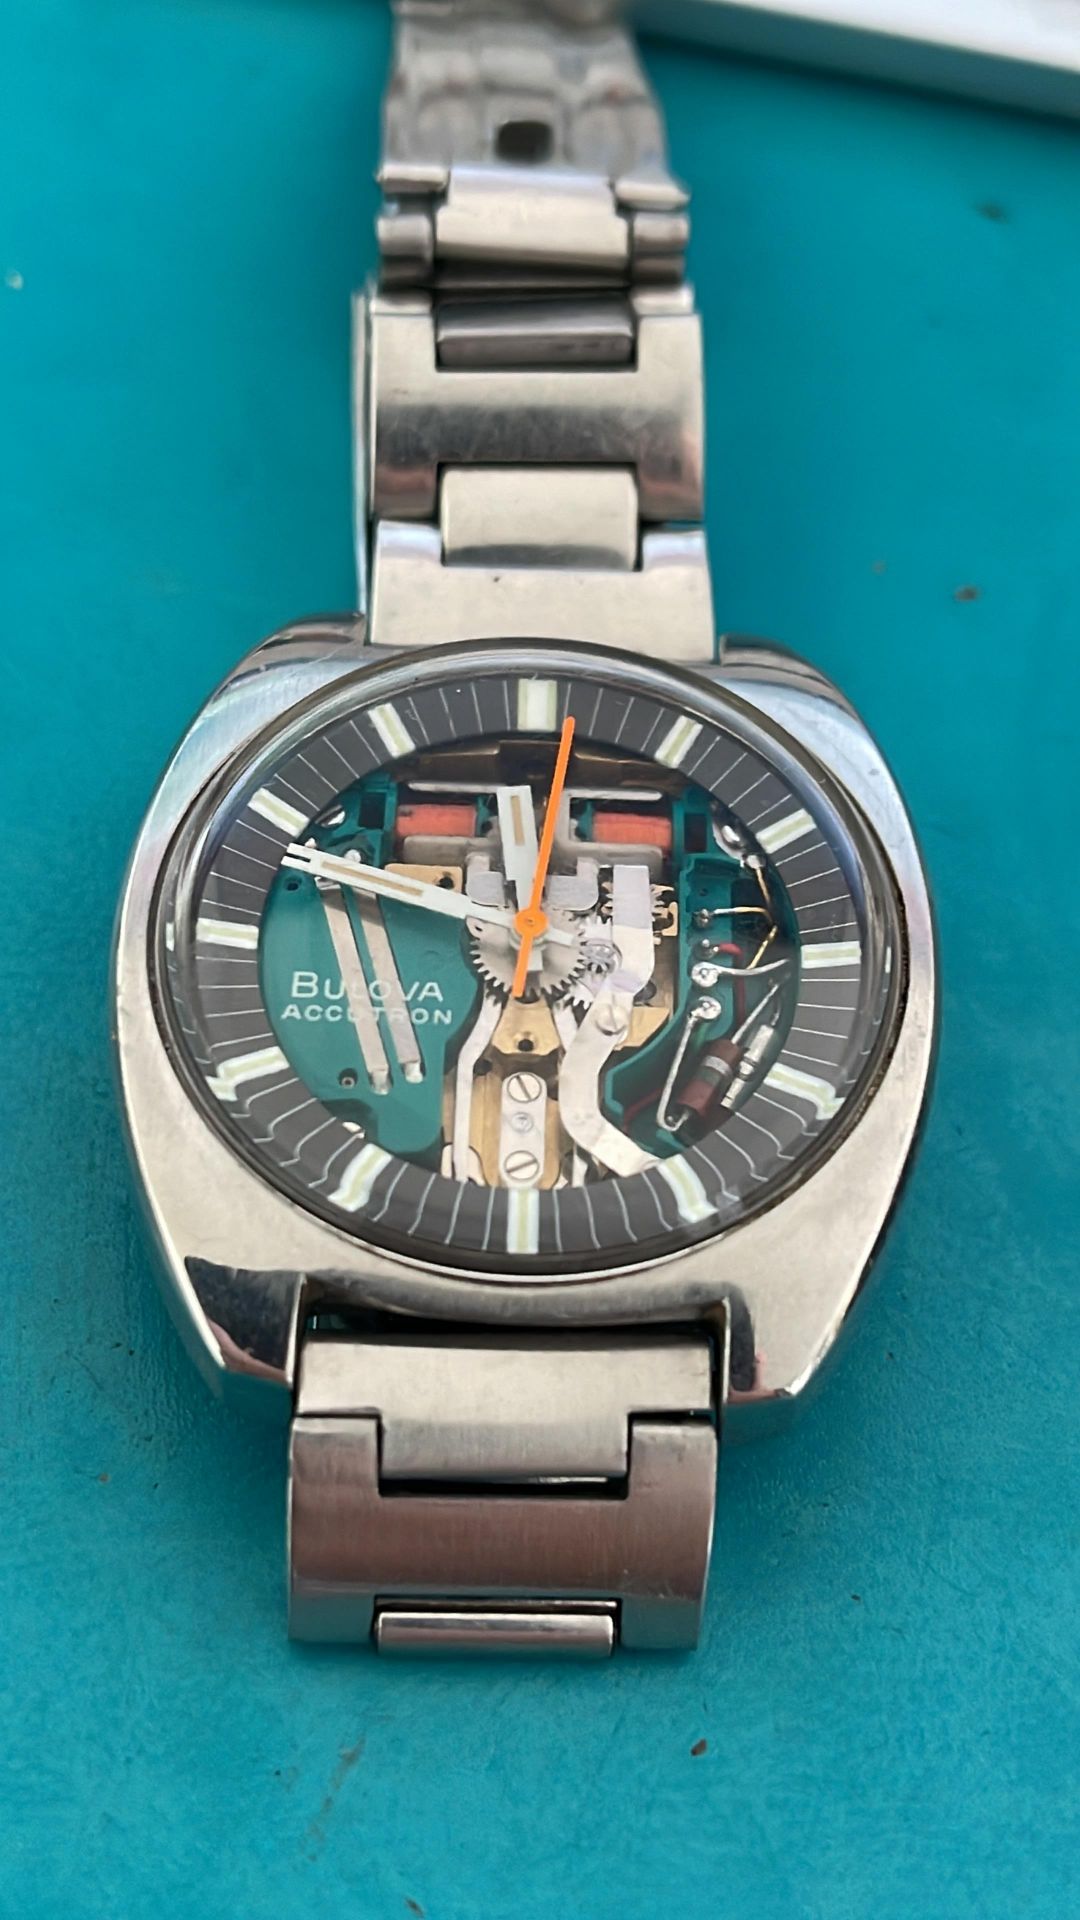 The Bulova Accutron space view watch fully working